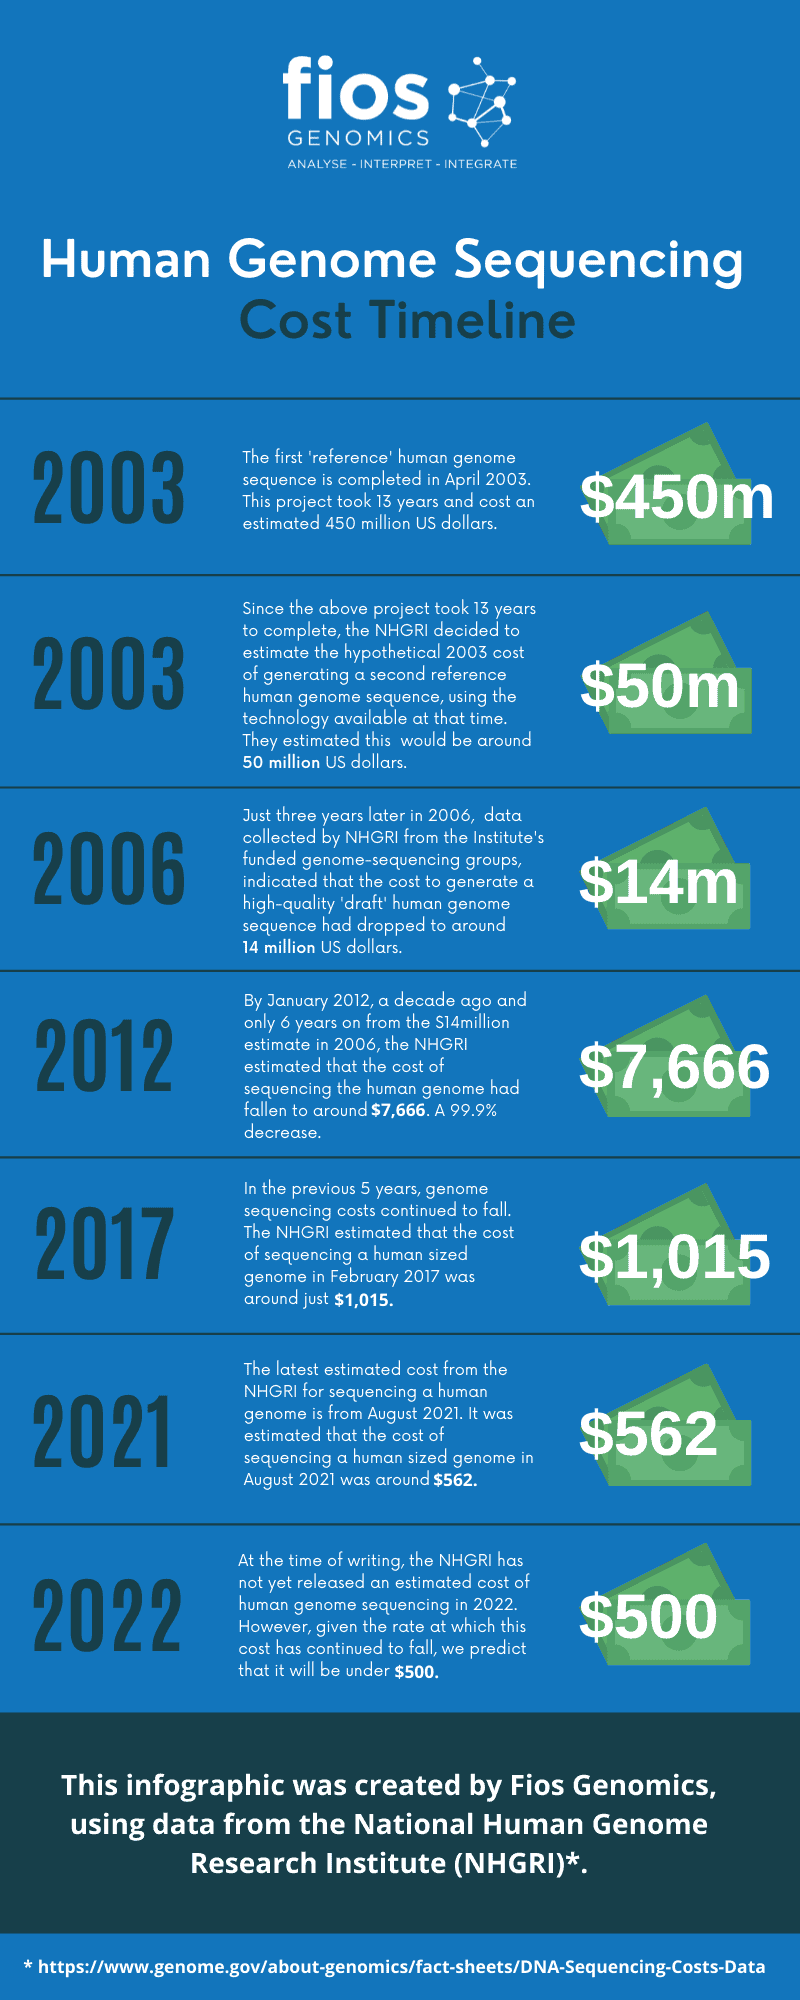 An infographic showing the falling cost of genomic sequencing from $450m in 2003 to under $500 in 2022.